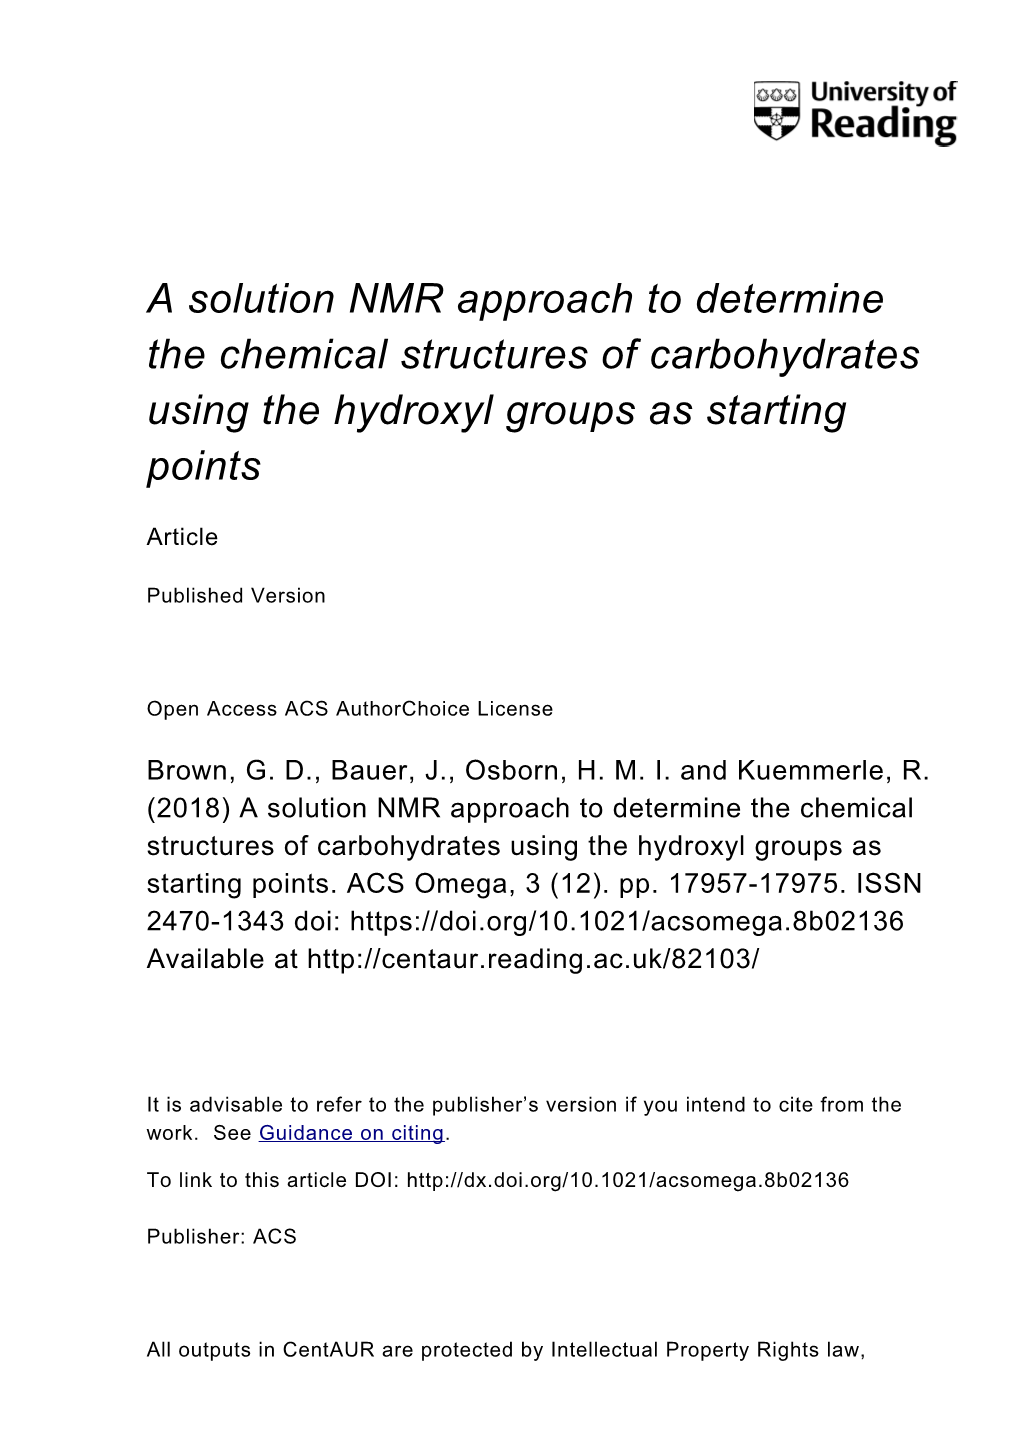 A Solution NMR Approach to Determine the Chemical Structures of Carbohydrates Using the Hydroxyl Groups As Starting Points